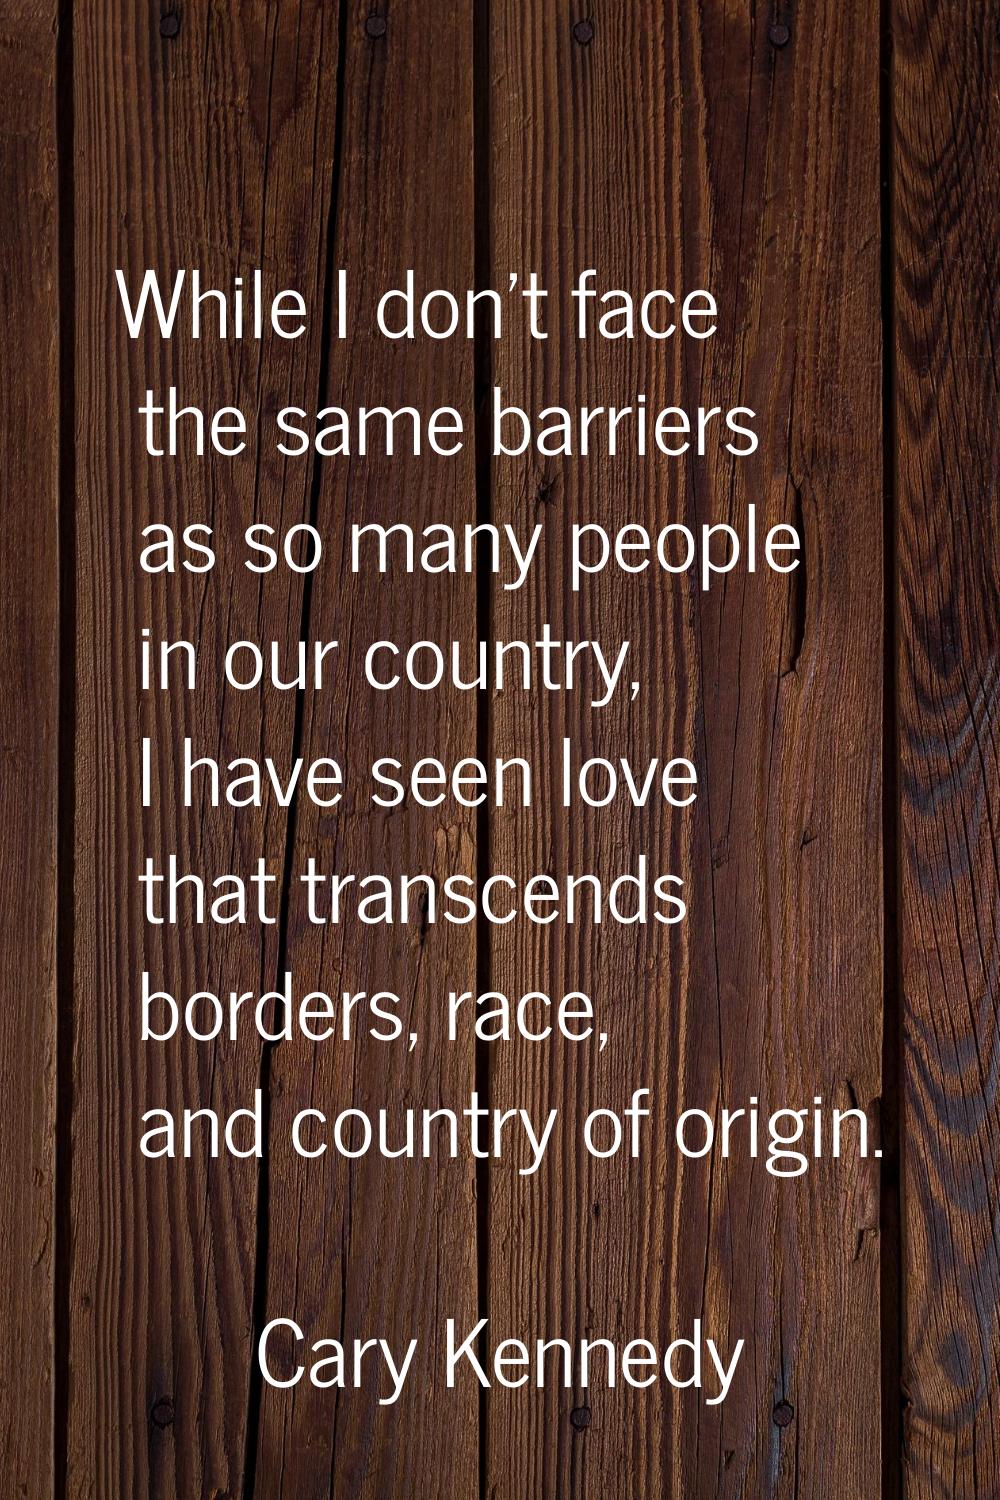 While I don't face the same barriers as so many people in our country, I have seen love that transc